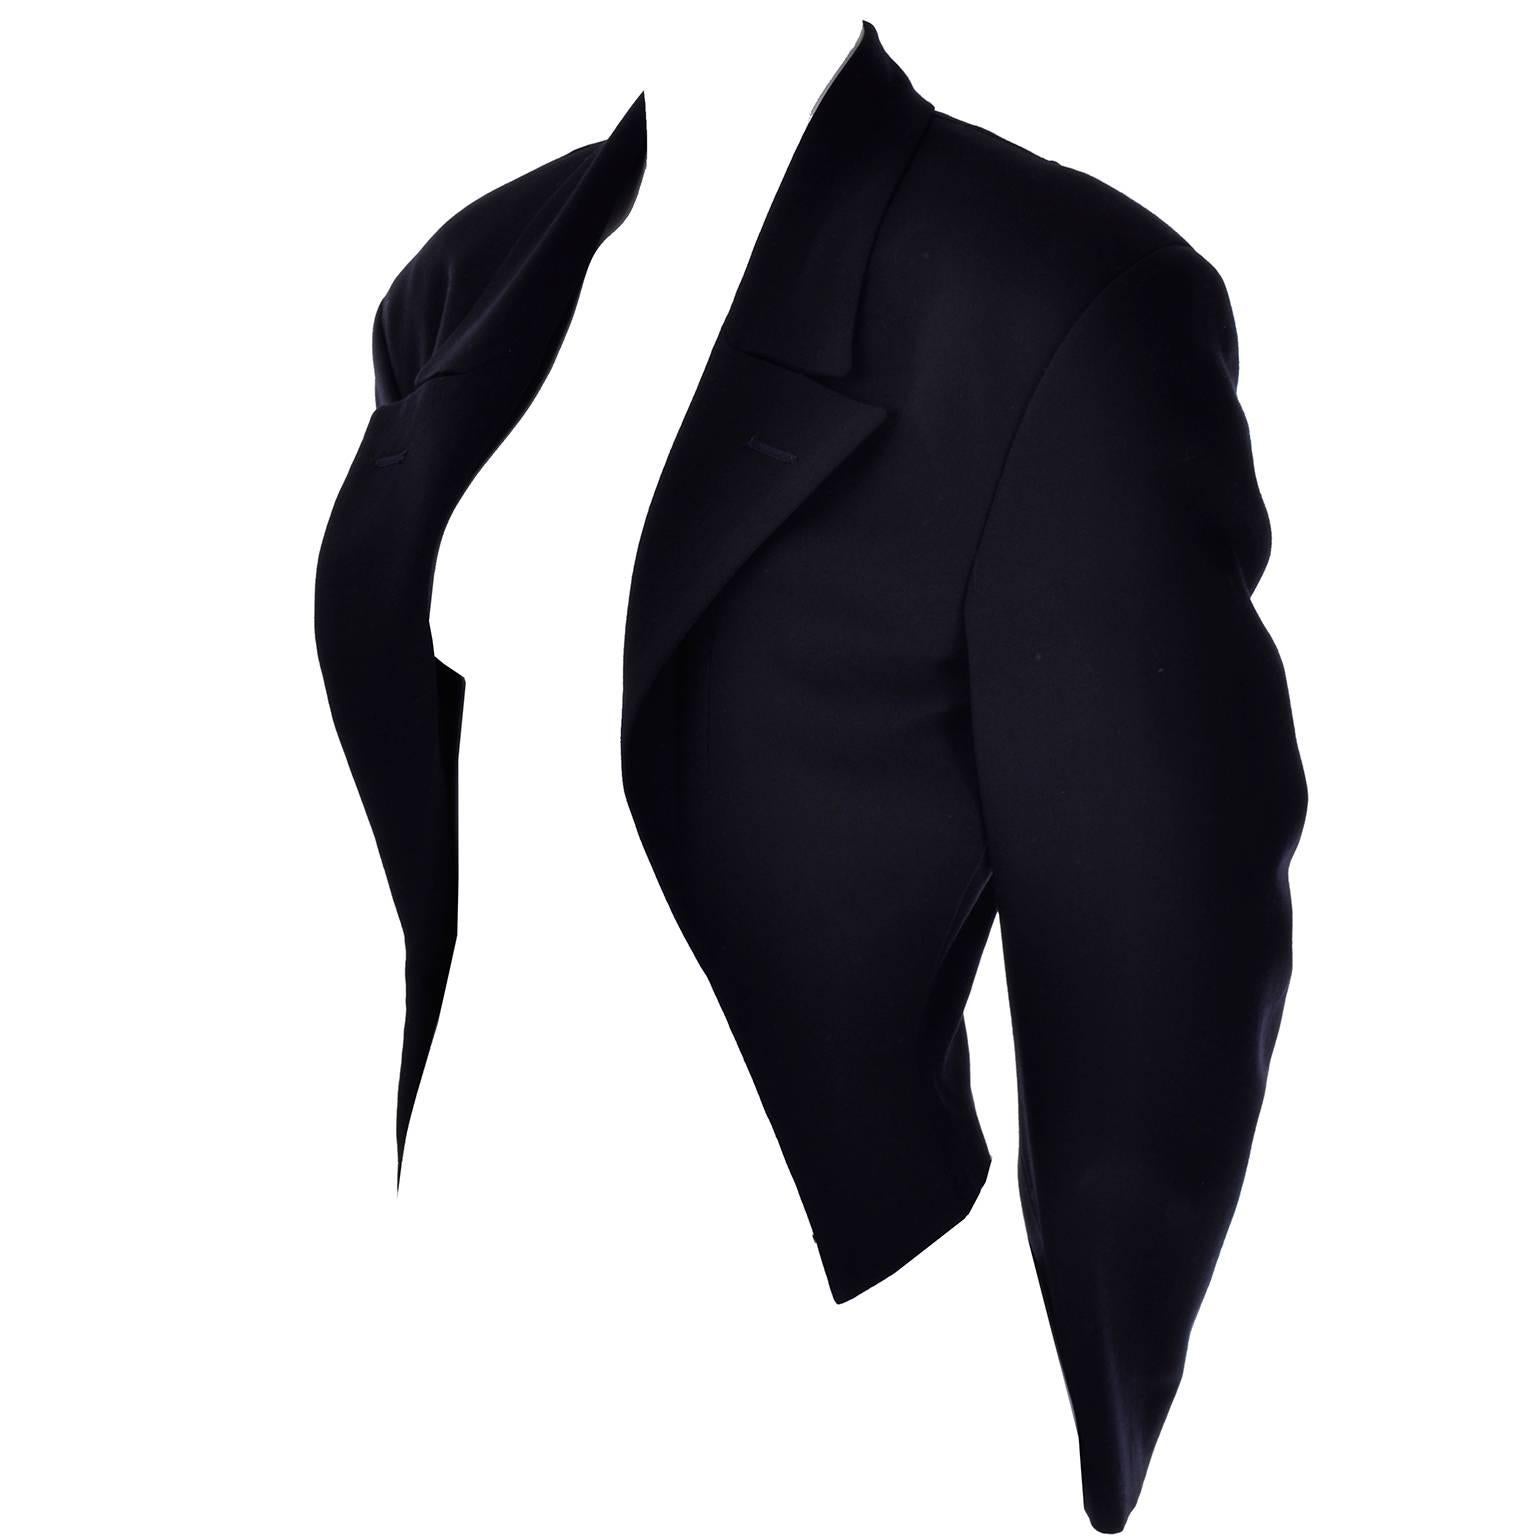 This is a Comme des Garcons cutaway jacket that is open in the front, tapering at the waist and coming to the point in front. This deep midnight navy blue blazer is cropped, with dramatic shoulder pads for a flattering fit. 100% wool jacket that is